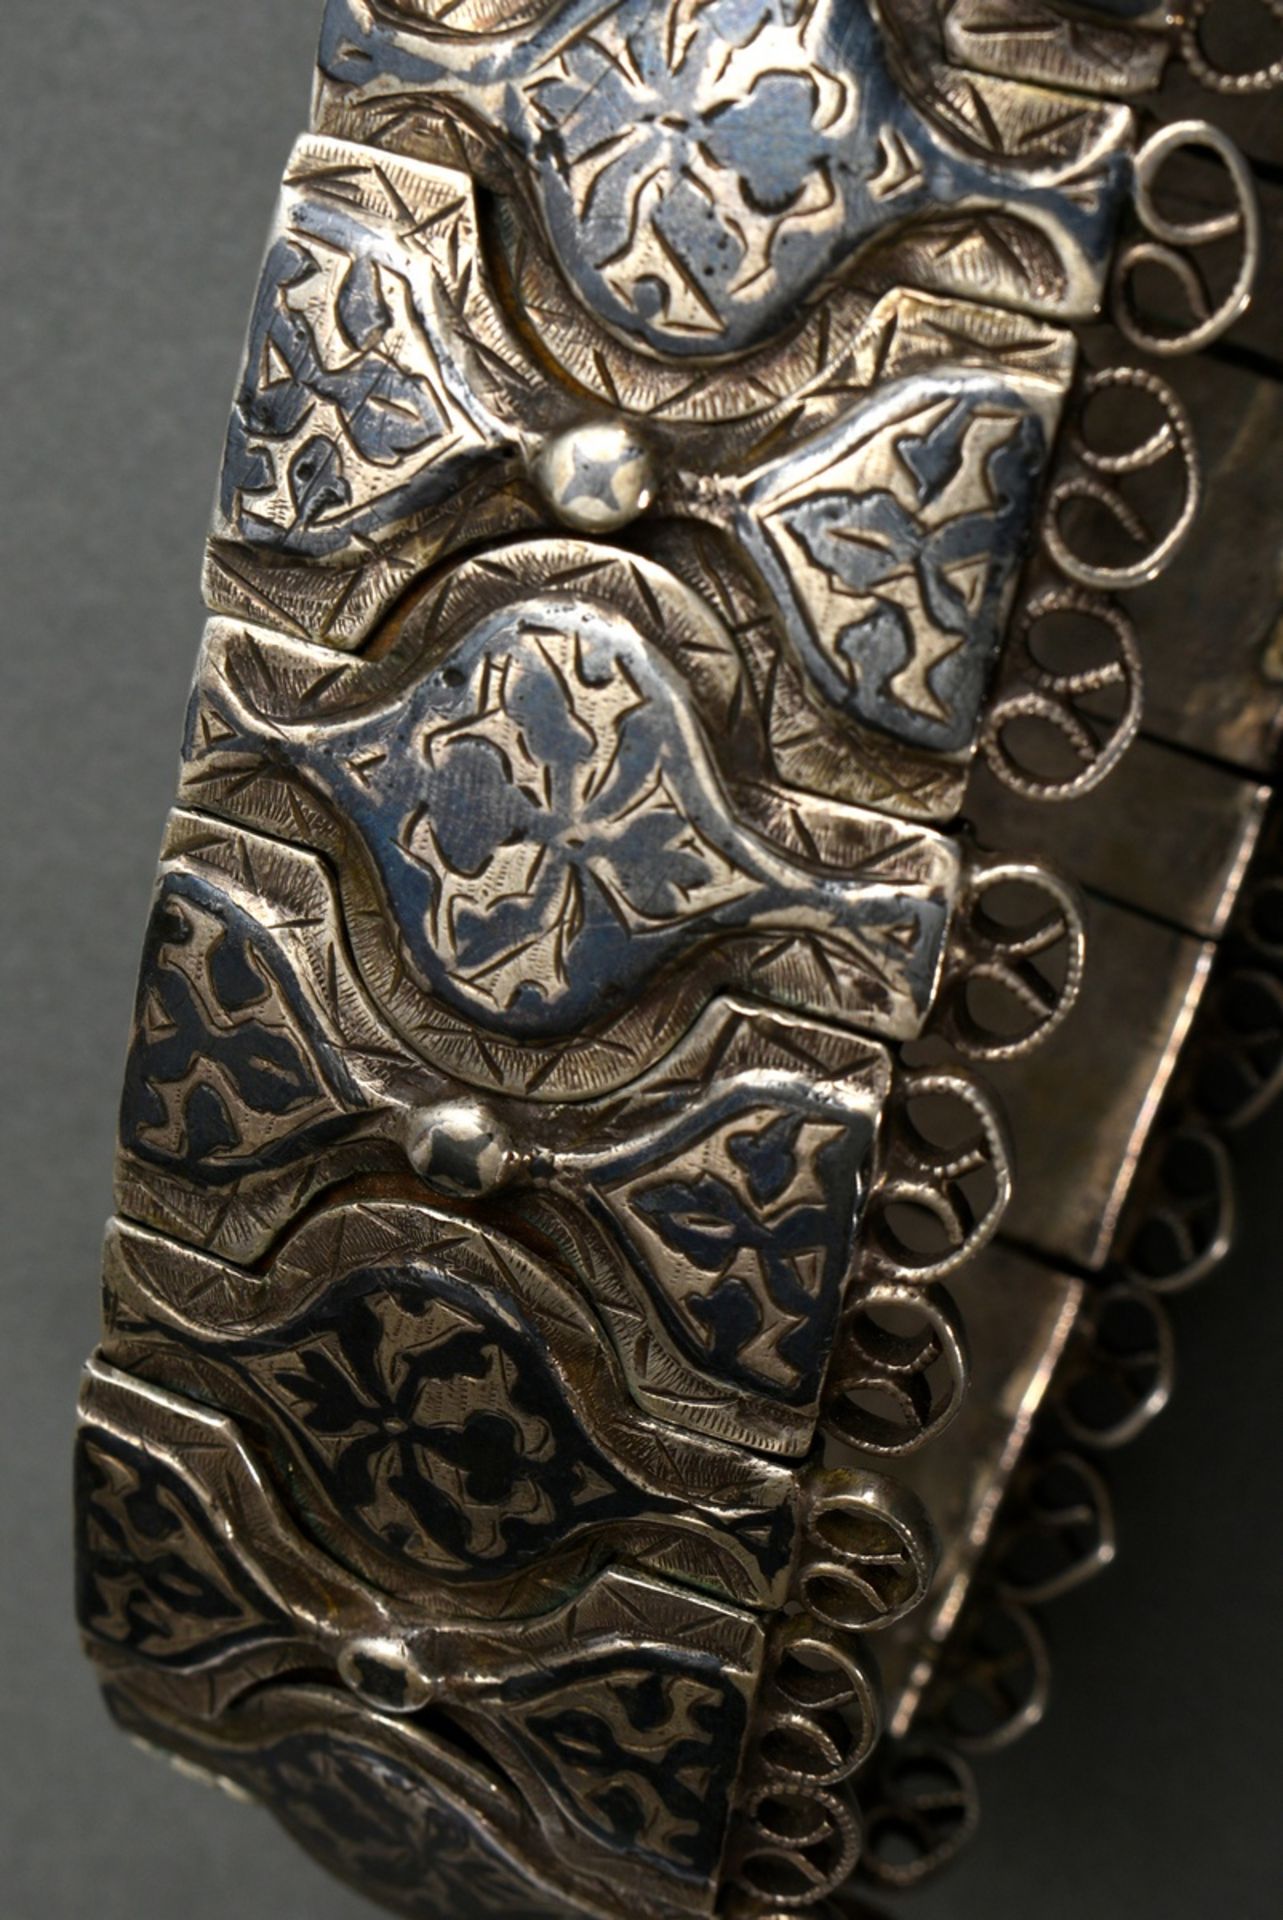 Caucasian women's belt with tendril decoration in niello work and fine chasing, soldered wire loops - Image 4 of 6